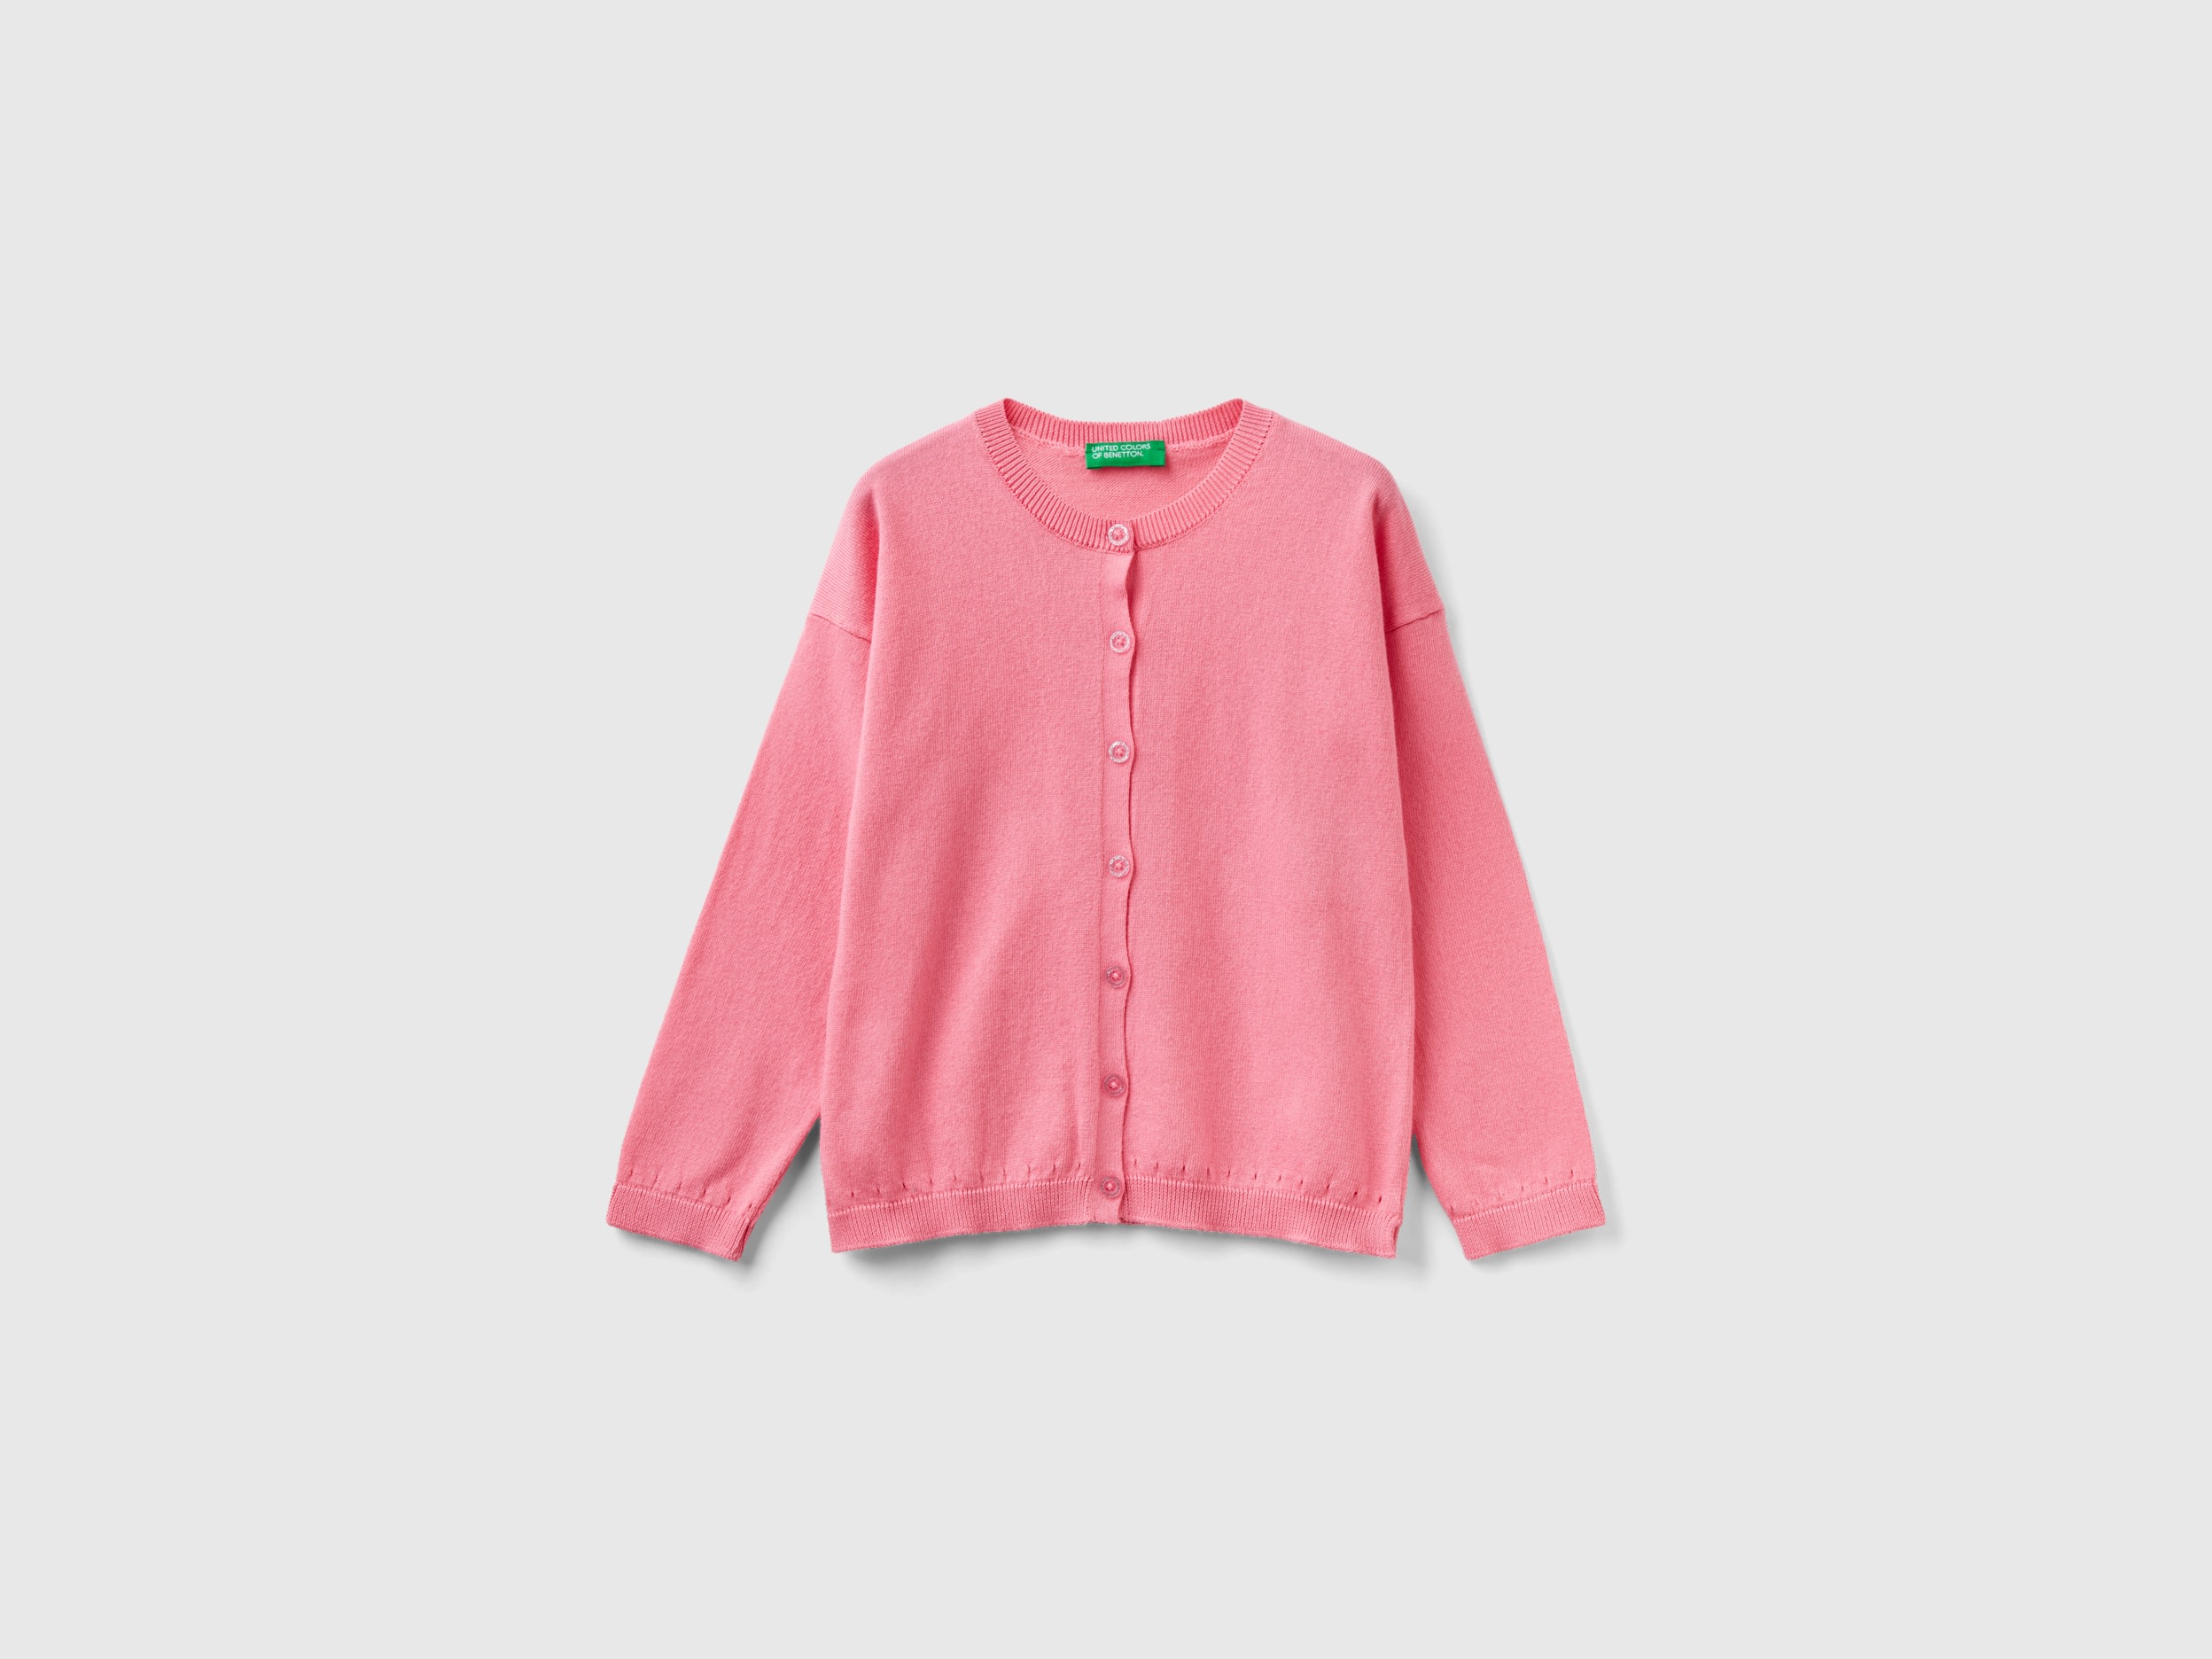 Benetton, Cardigan With Glittery Buttons, size 4-5, Pink, Kids